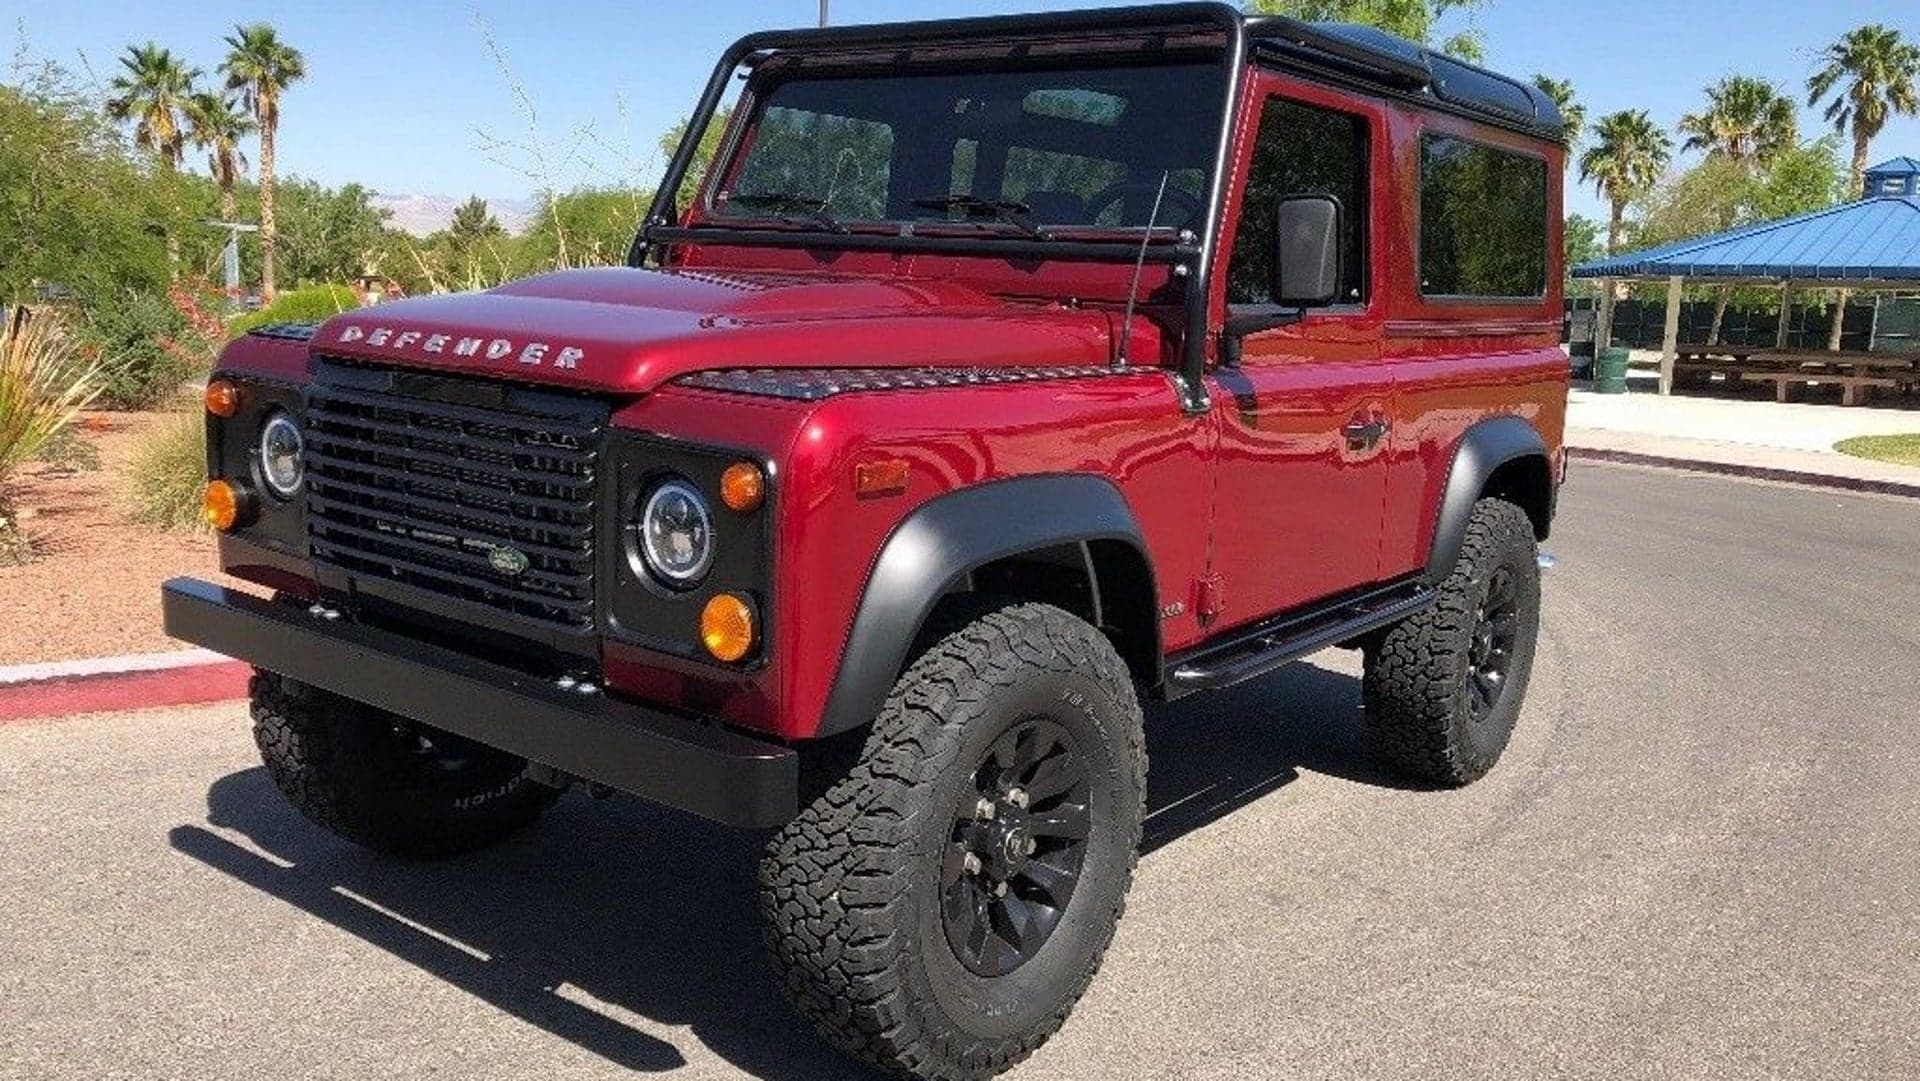 This LS-Swapped 1995 Land Rover Defender on eBay Is a Redcoat with an American Heart